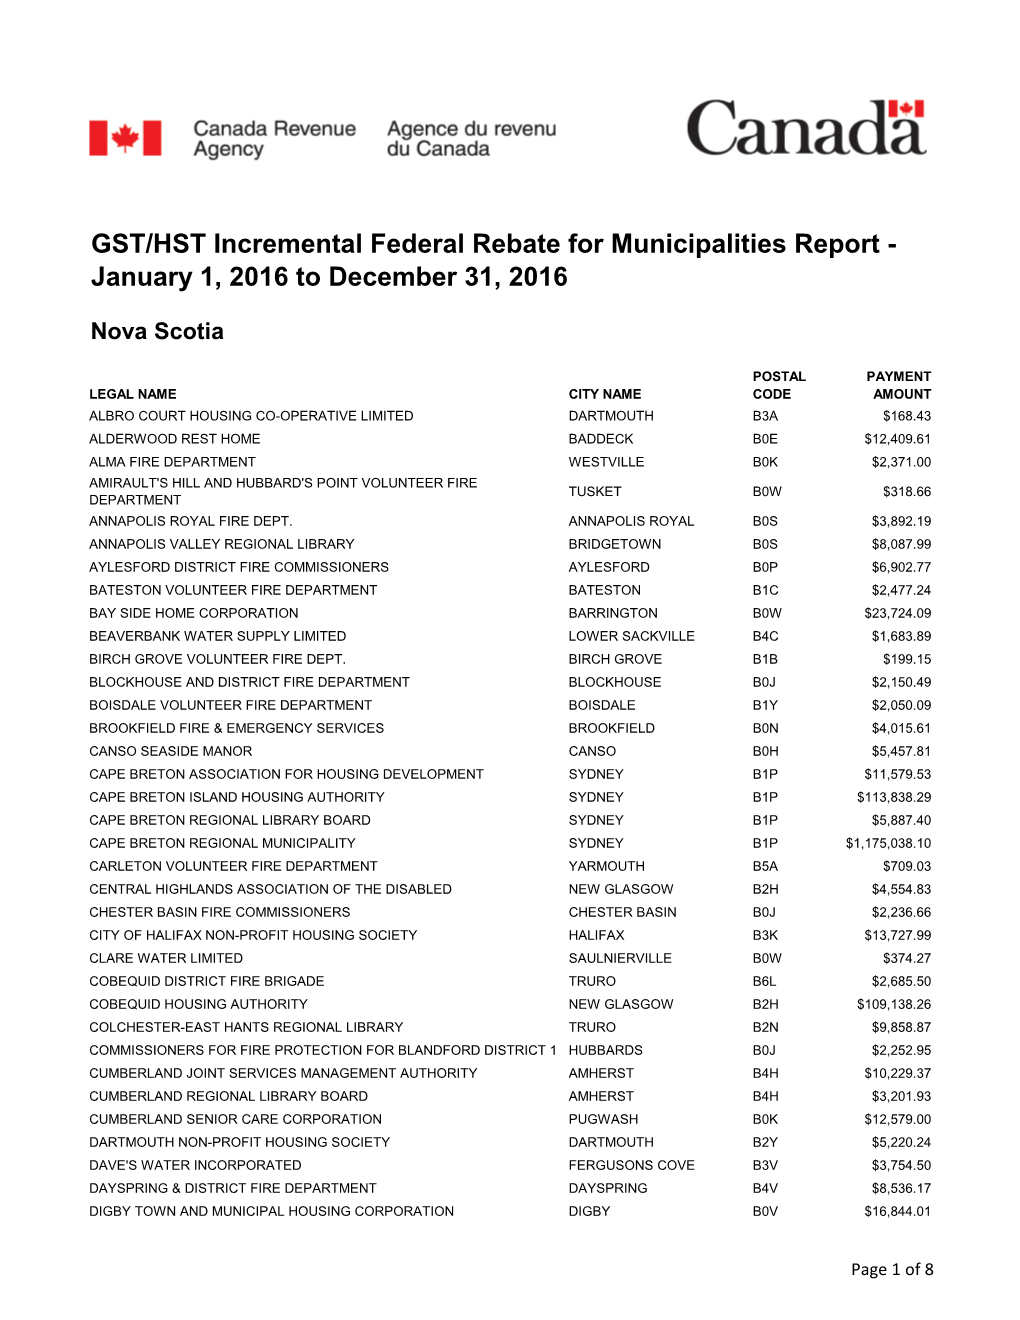 GST/HST Incremental Federal Rebate for Municipalities Report - January 1, 2016 to December 31, 2016